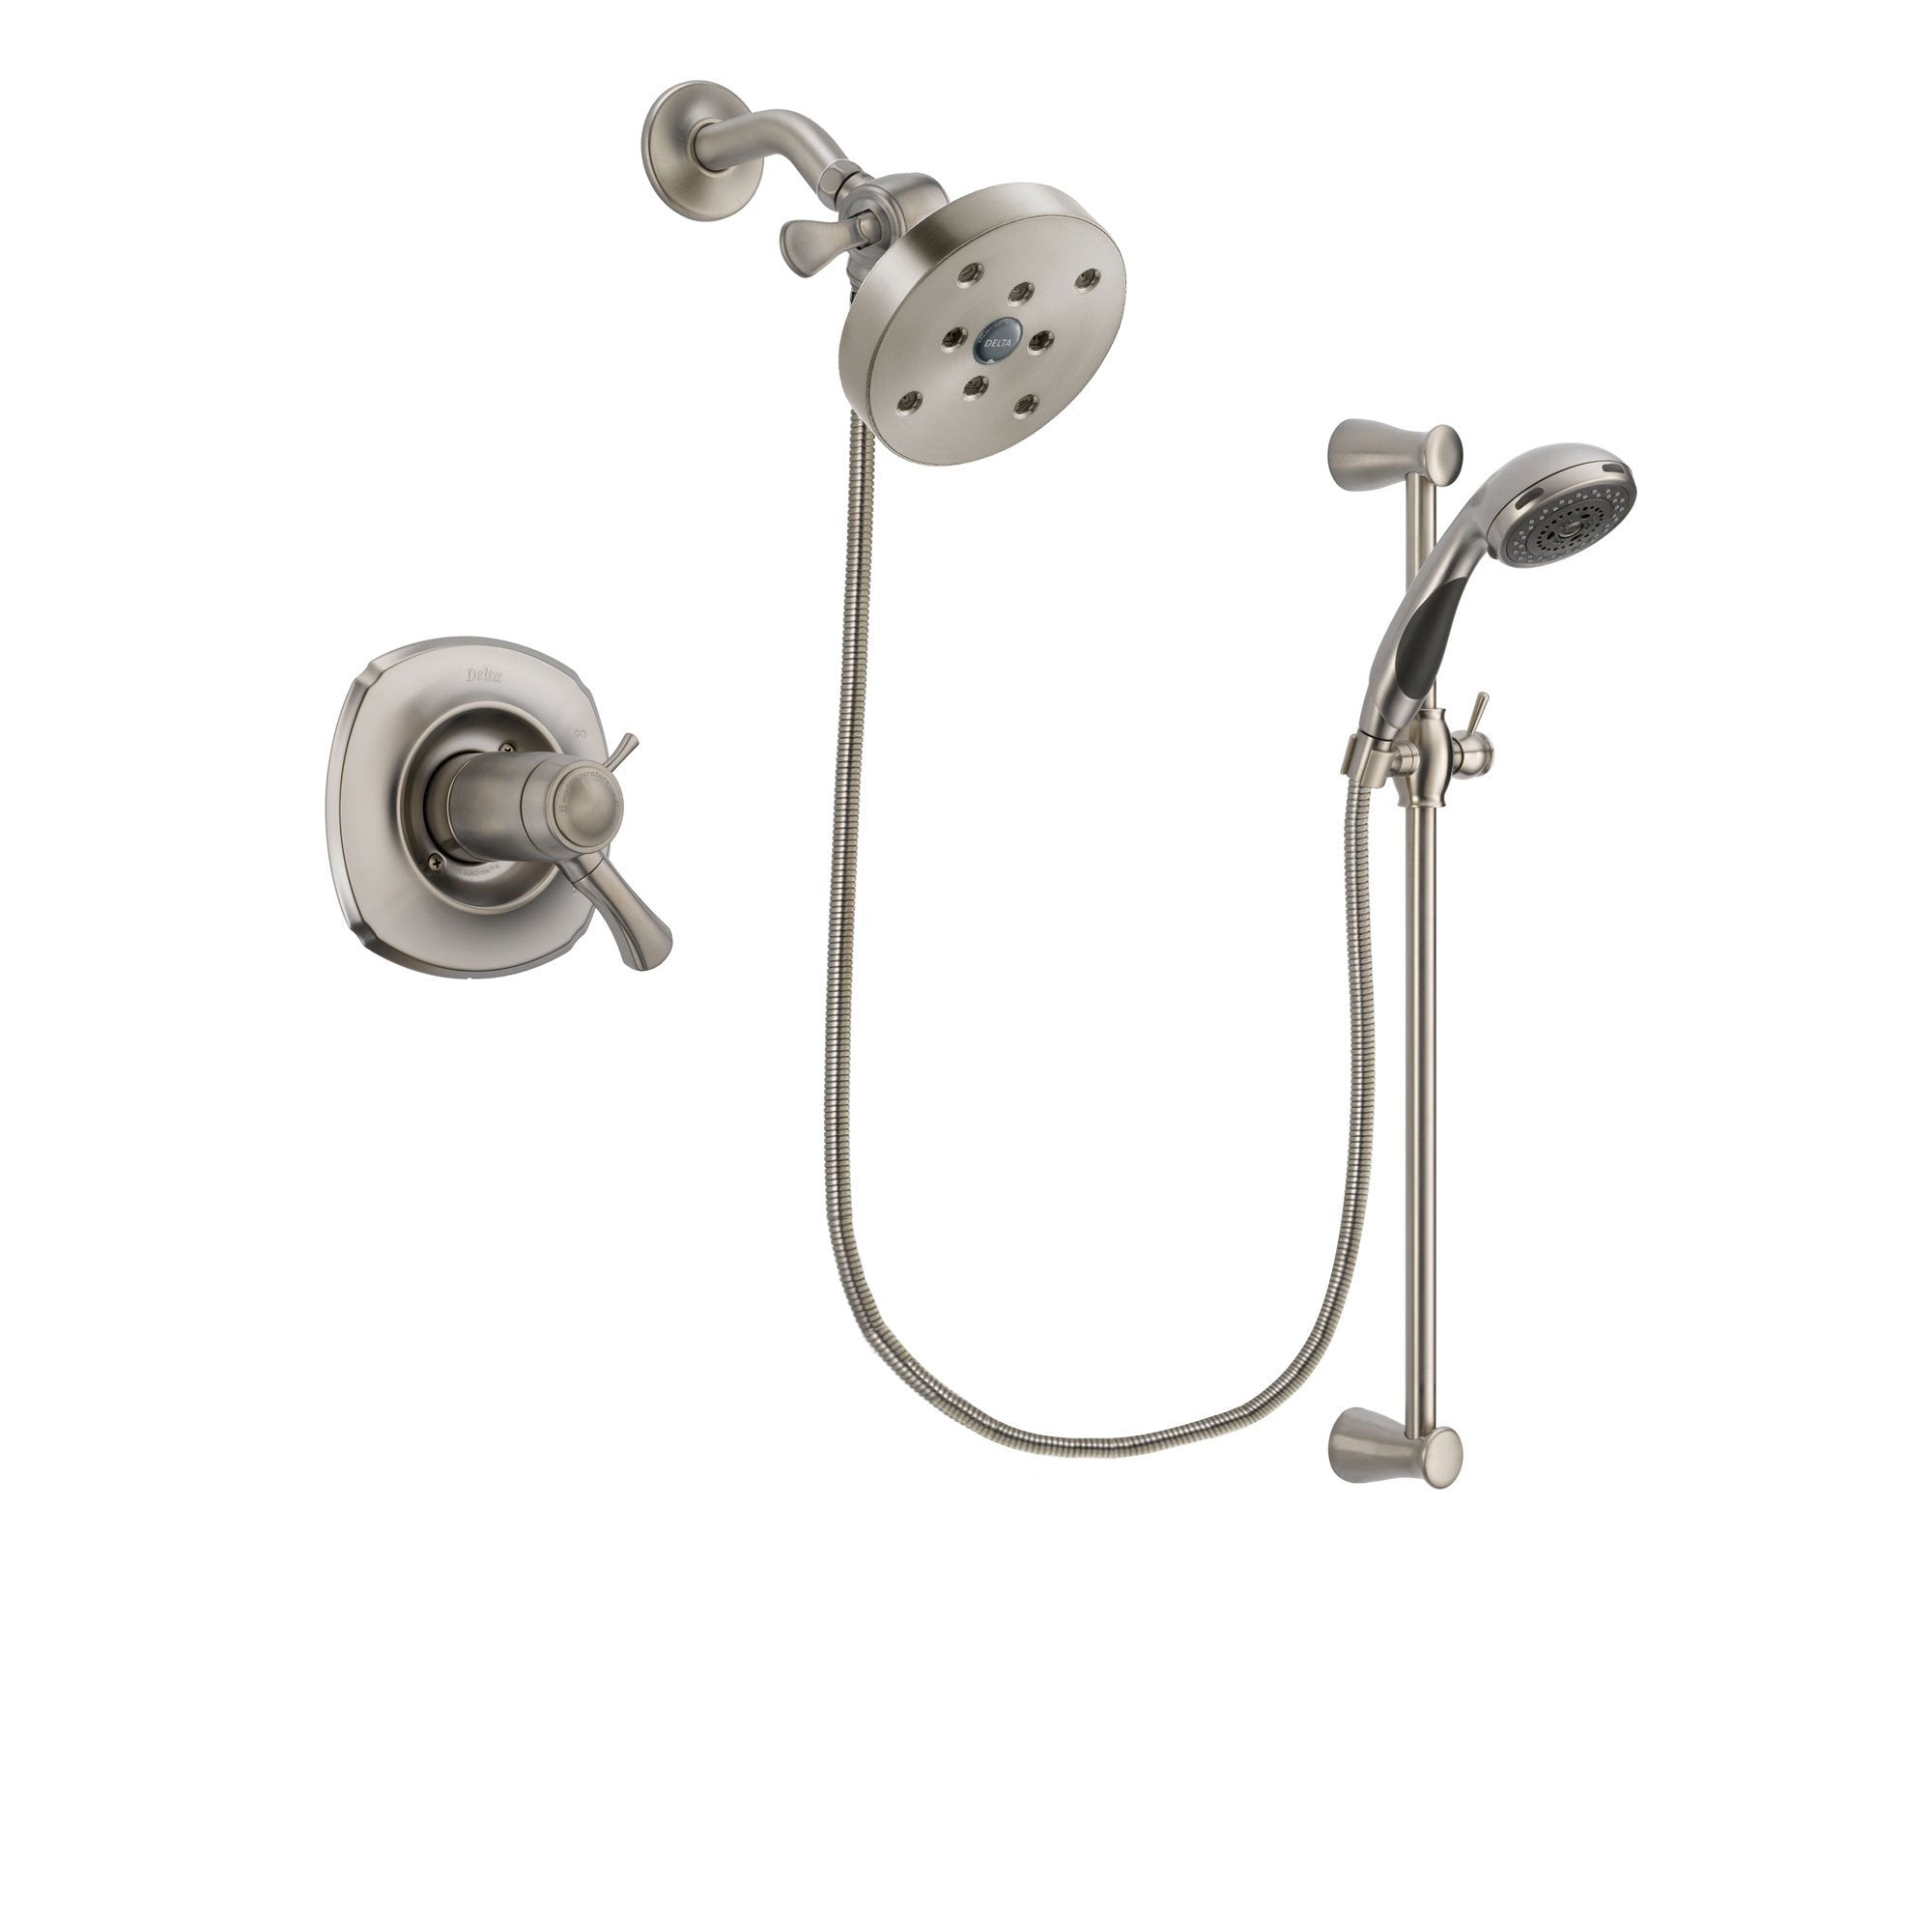 Delta Addison Stainless Steel Finish Thermostatic Shower Faucet System Package with 5-1/2 inch Shower Head and Handheld Shower Spray with Slide Bar Includes Rough-in Valve DSP1622V